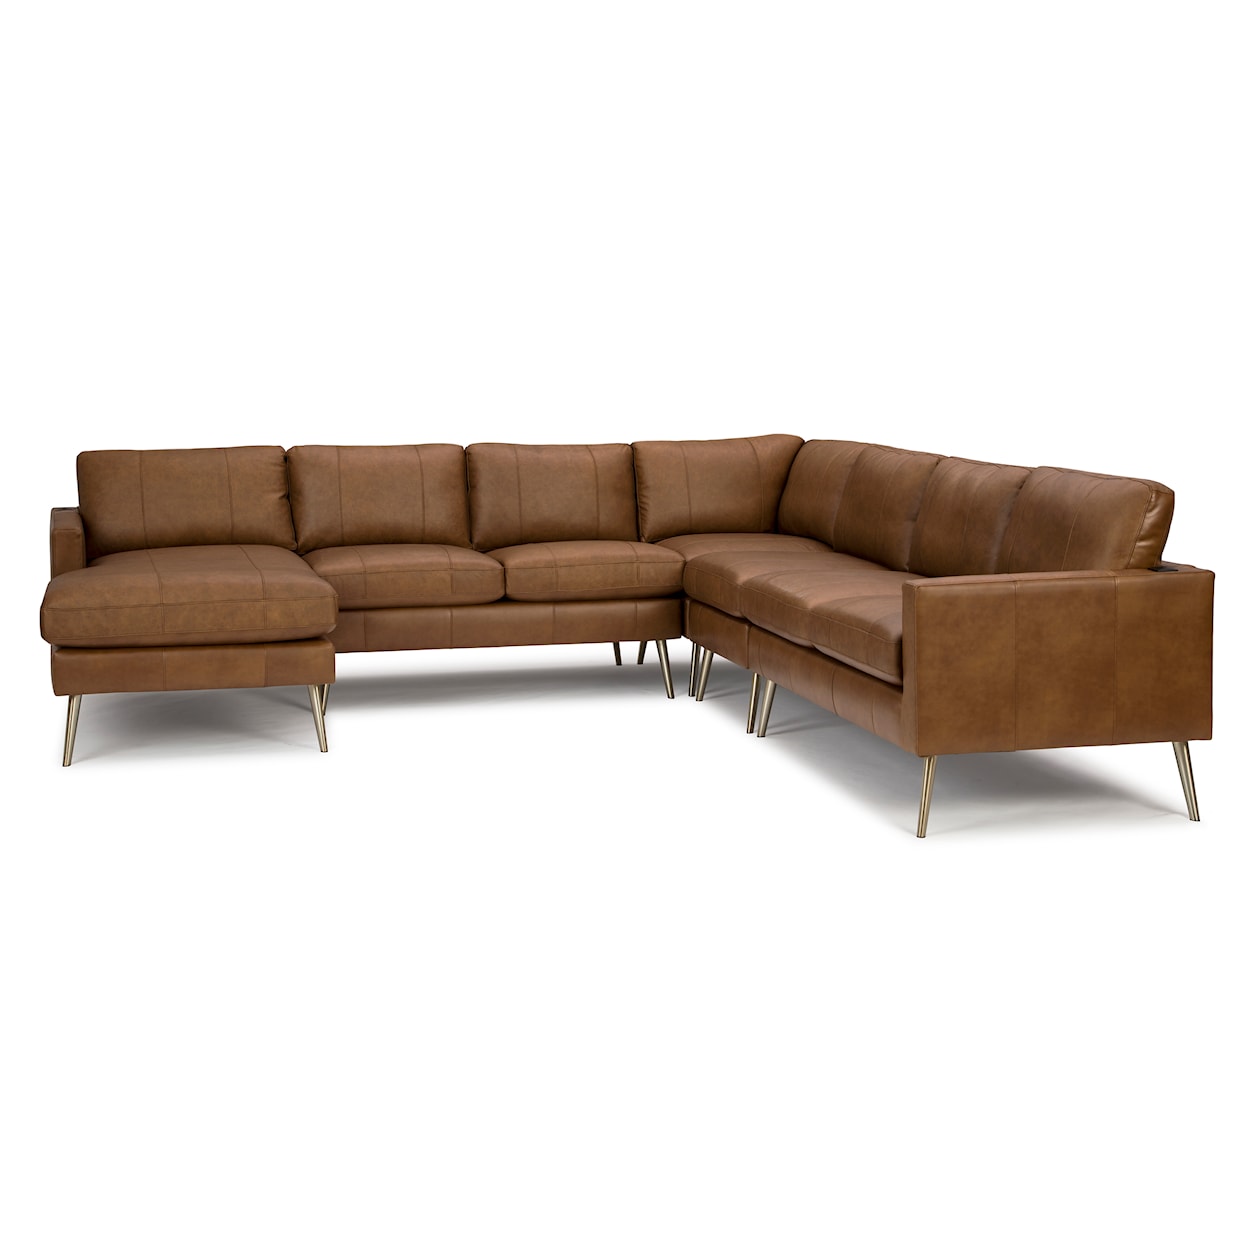 Best Home Furnishings Trafton Leather Sectional Sofa w/Chaise & Metal Feet